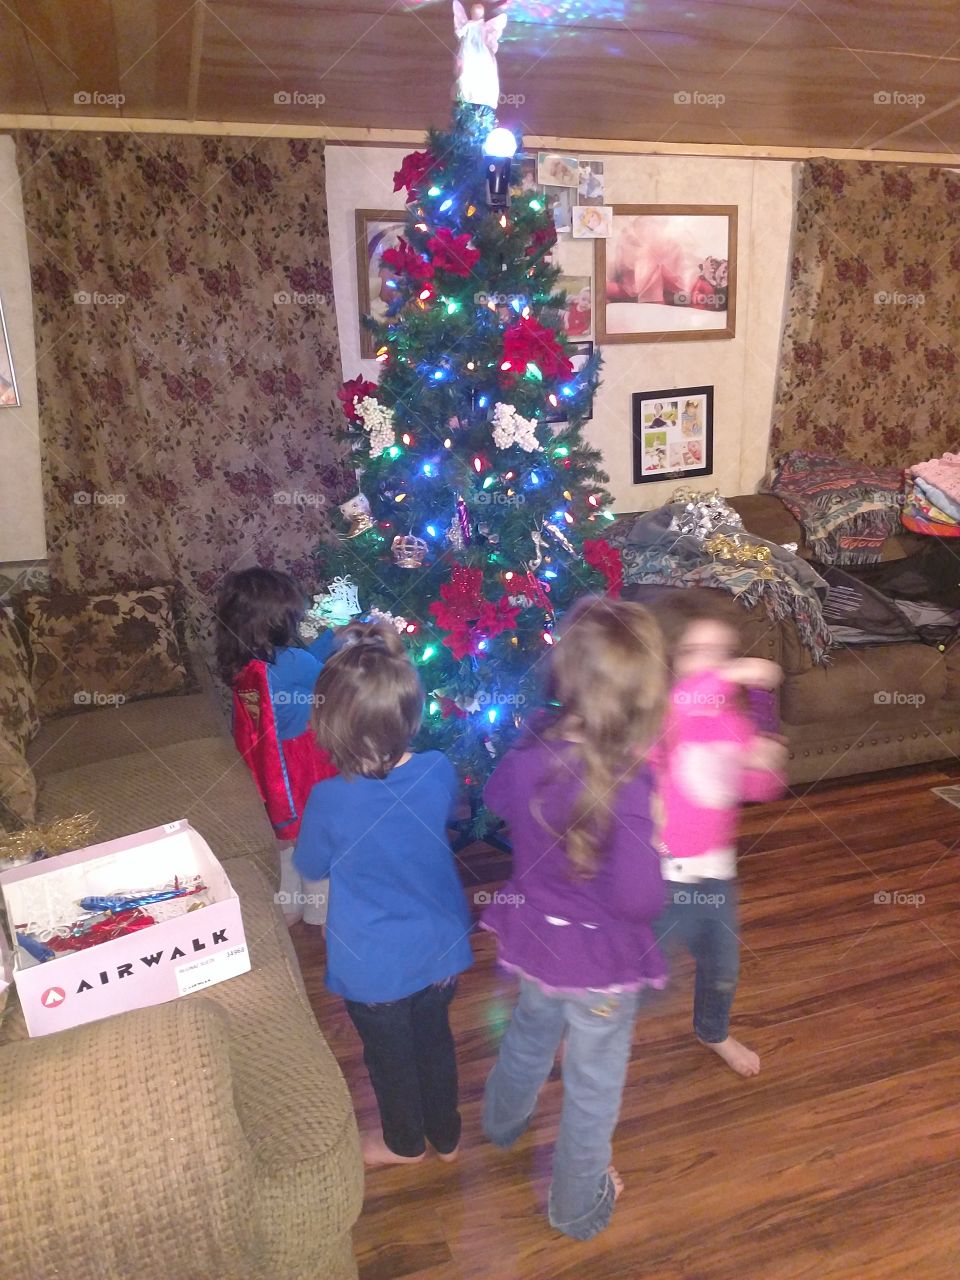 making memories, getting ready for Santa, grandkids decorate the tree